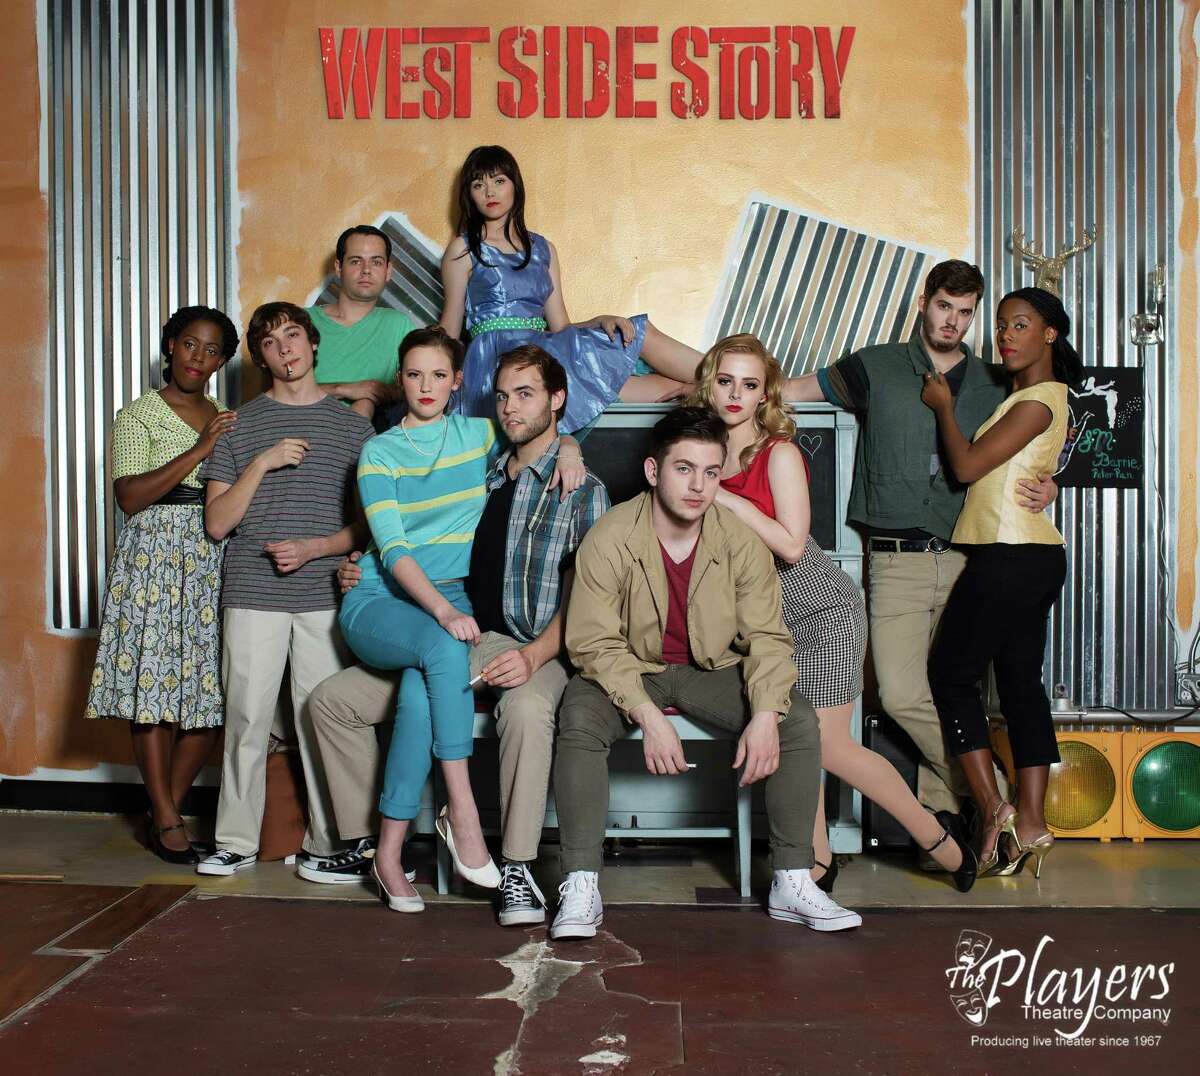 The Players Theatre Company opens "West Side Story" May 12 at the Owen Theatre. The show runs weekends through June 3. Visit www.owentheatre.com or call 936-539-4090 for tickets.